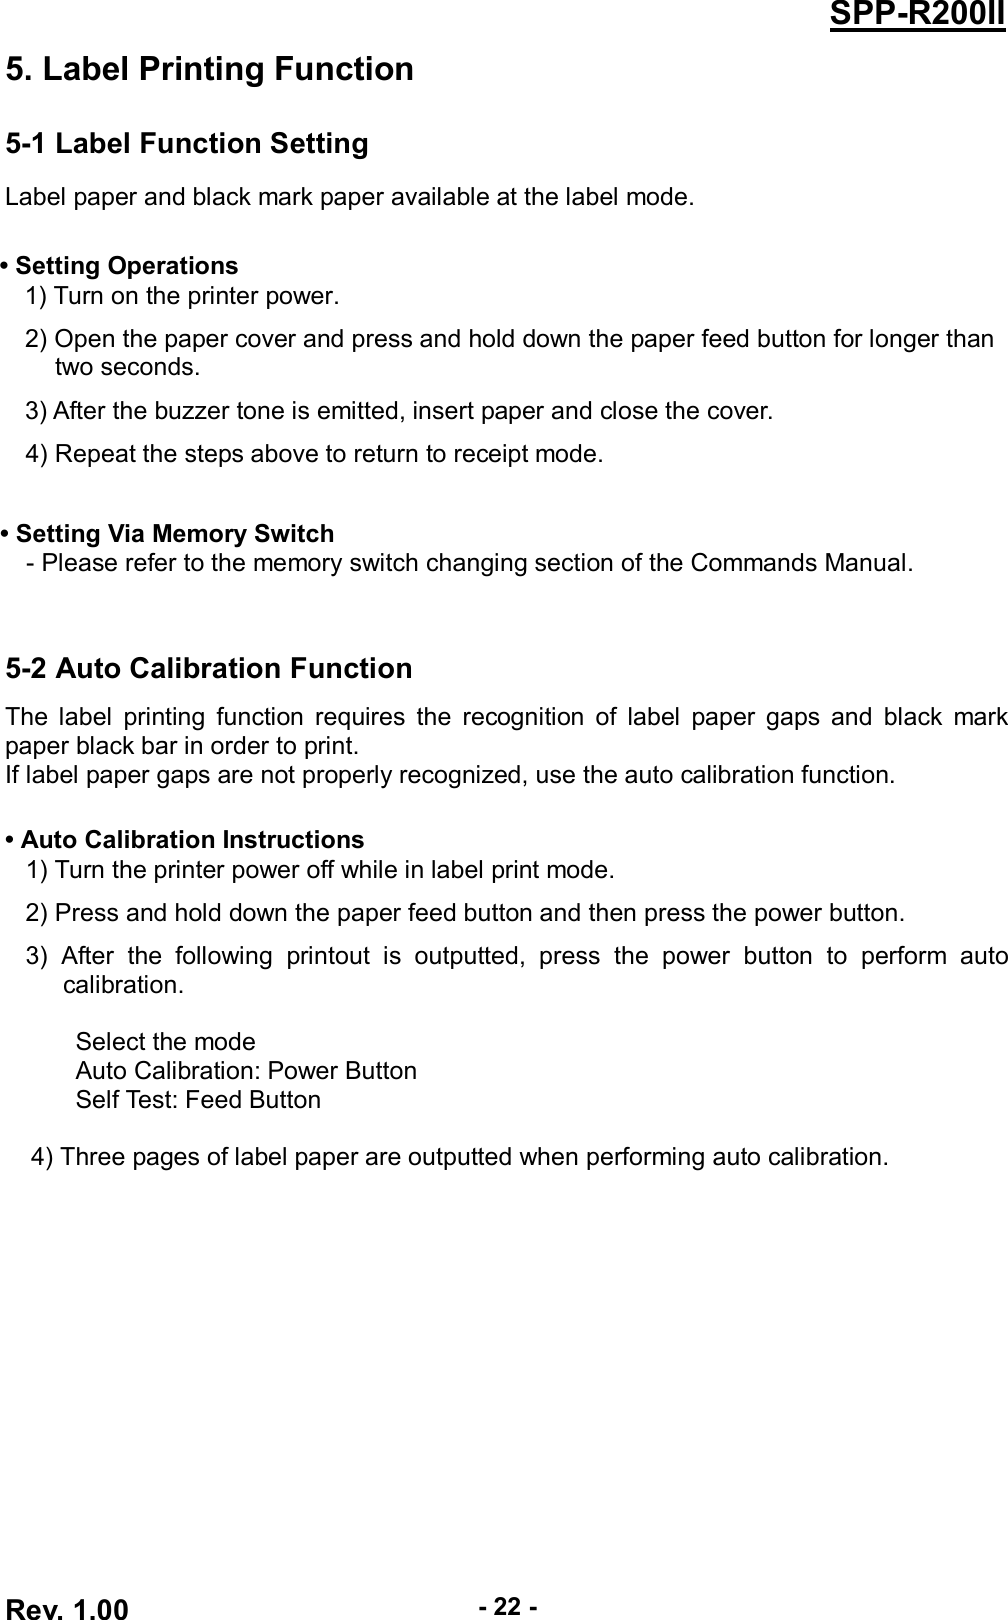  Rev. 1.00 - 22 - SPP-R200II 5. Label Printing Function 5-1 Label Function Setting Label paper and black mark paper available at the label mode.  • Setting Operations 1) Turn on the printer power. 2) Open the paper cover and press and hold down the paper feed button for longer than   two seconds. 3) After the buzzer tone is emitted, insert paper and close the cover. 4) Repeat the steps above to return to receipt mode.    • Setting Via Memory Switch - Please refer to the memory switch changing section of the Commands Manual.   5-2 Auto Calibration Function The  label  printing  function requires  the  recognition of  label  paper  gaps and  black  mark paper black bar in order to print. If label paper gaps are not properly recognized, use the auto calibration function.  • Auto Calibration Instructions 1) Turn the printer power off while in label print mode. 2) Press and hold down the paper feed button and then press the power button. 3)  After  the  following  printout  is  outputted,  press  the  power  button  to  perform  auto calibration.  Select the mode Auto Calibration: Power Button Self Test: Feed Button    4) Three pages of label paper are outputted when performing auto calibration.  